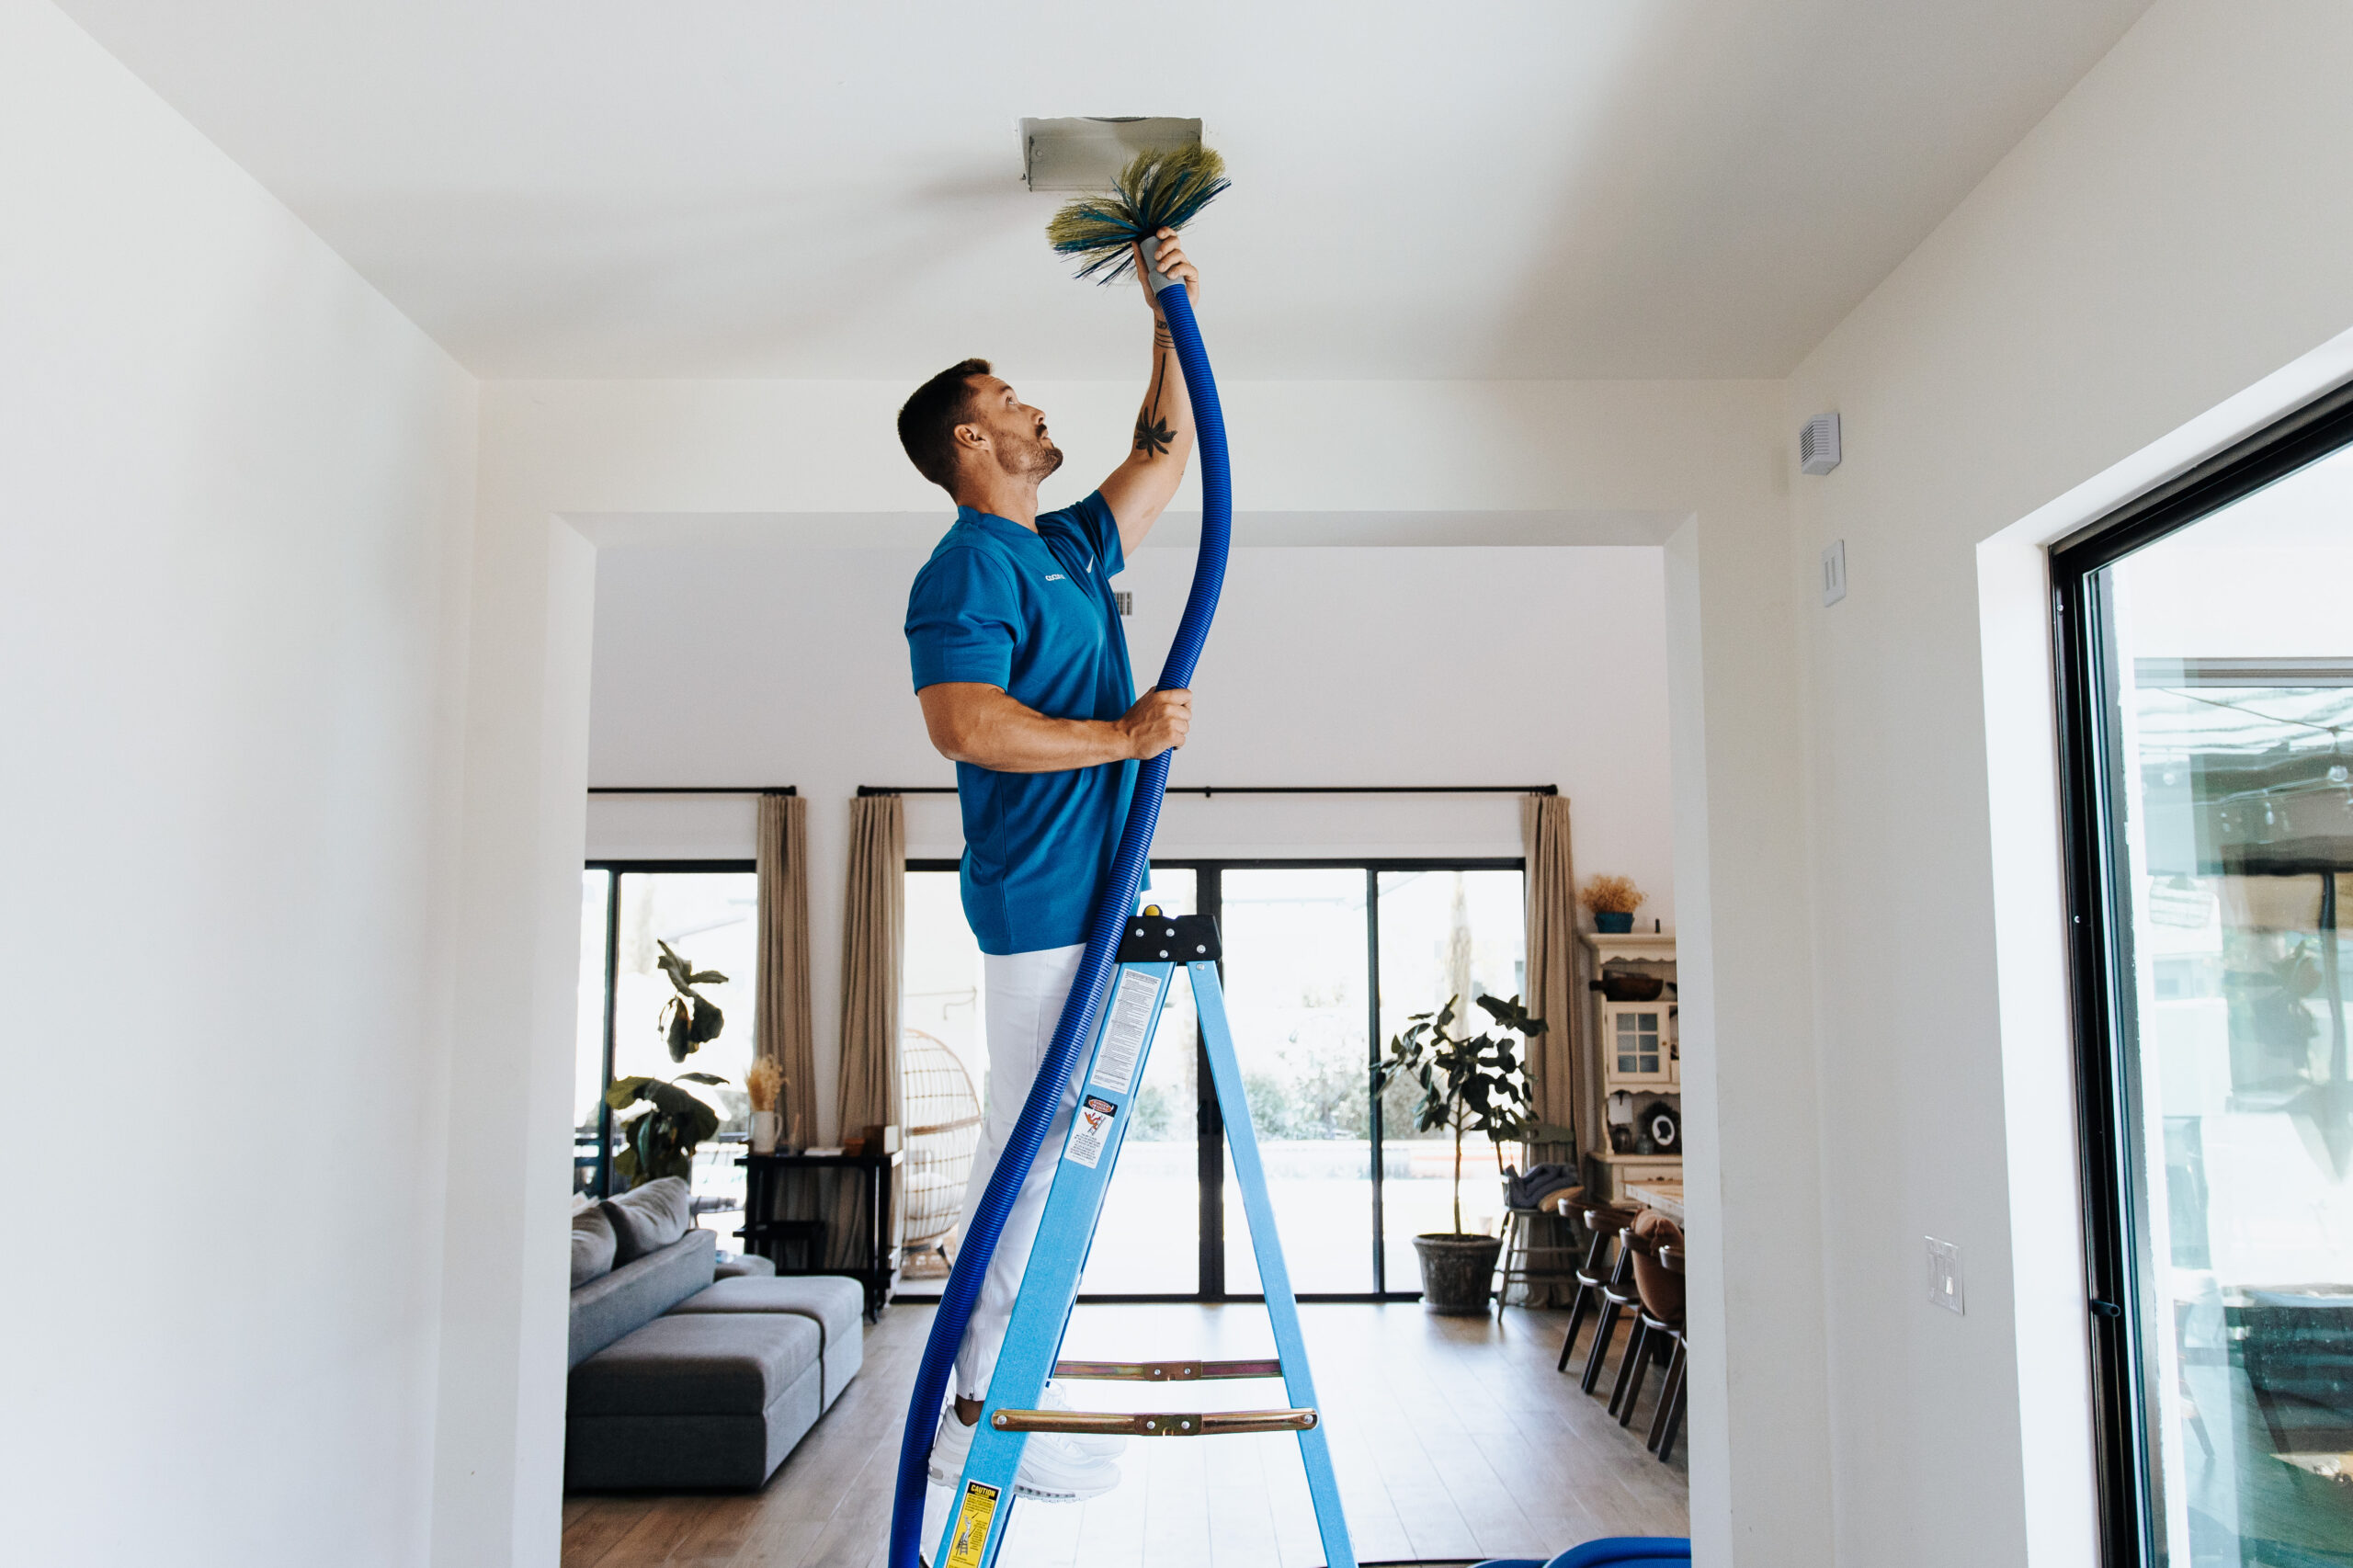 cleaning air ducts coconut cleaning